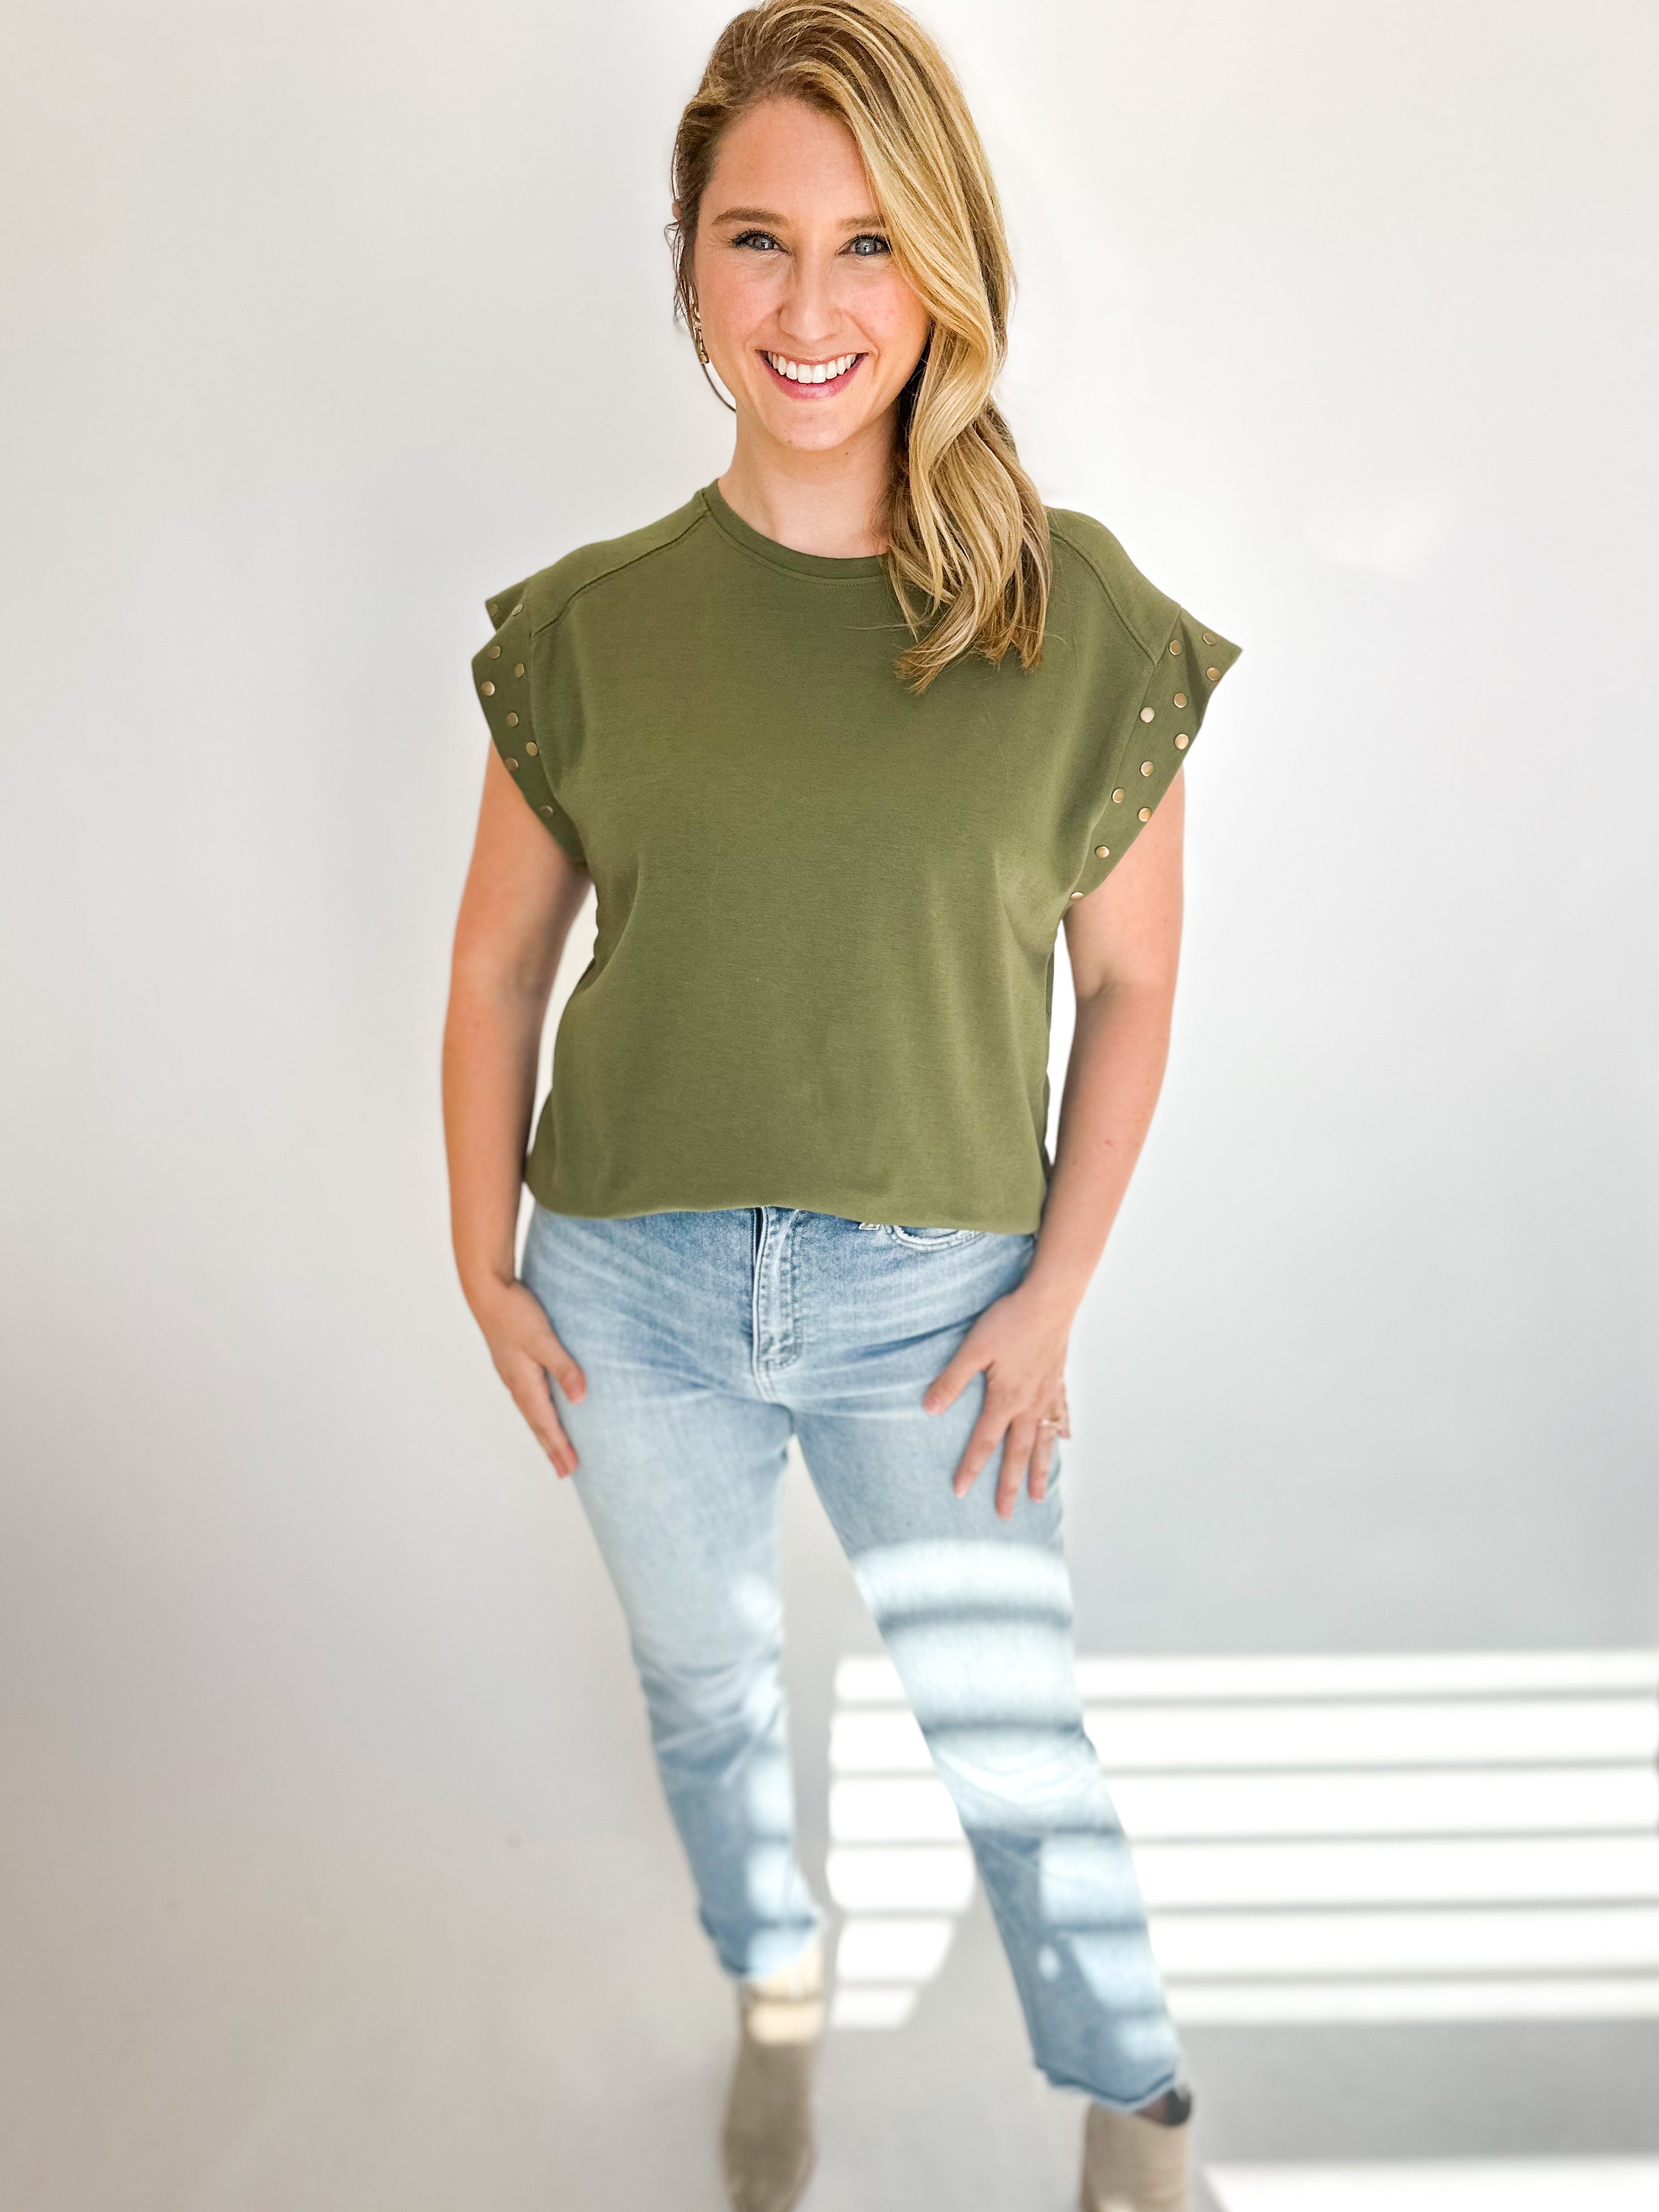 Studded Tee- Olive-210 Casual Blouses-ENTRO-July & June Women's Fashion Boutique Located in San Antonio, Texas